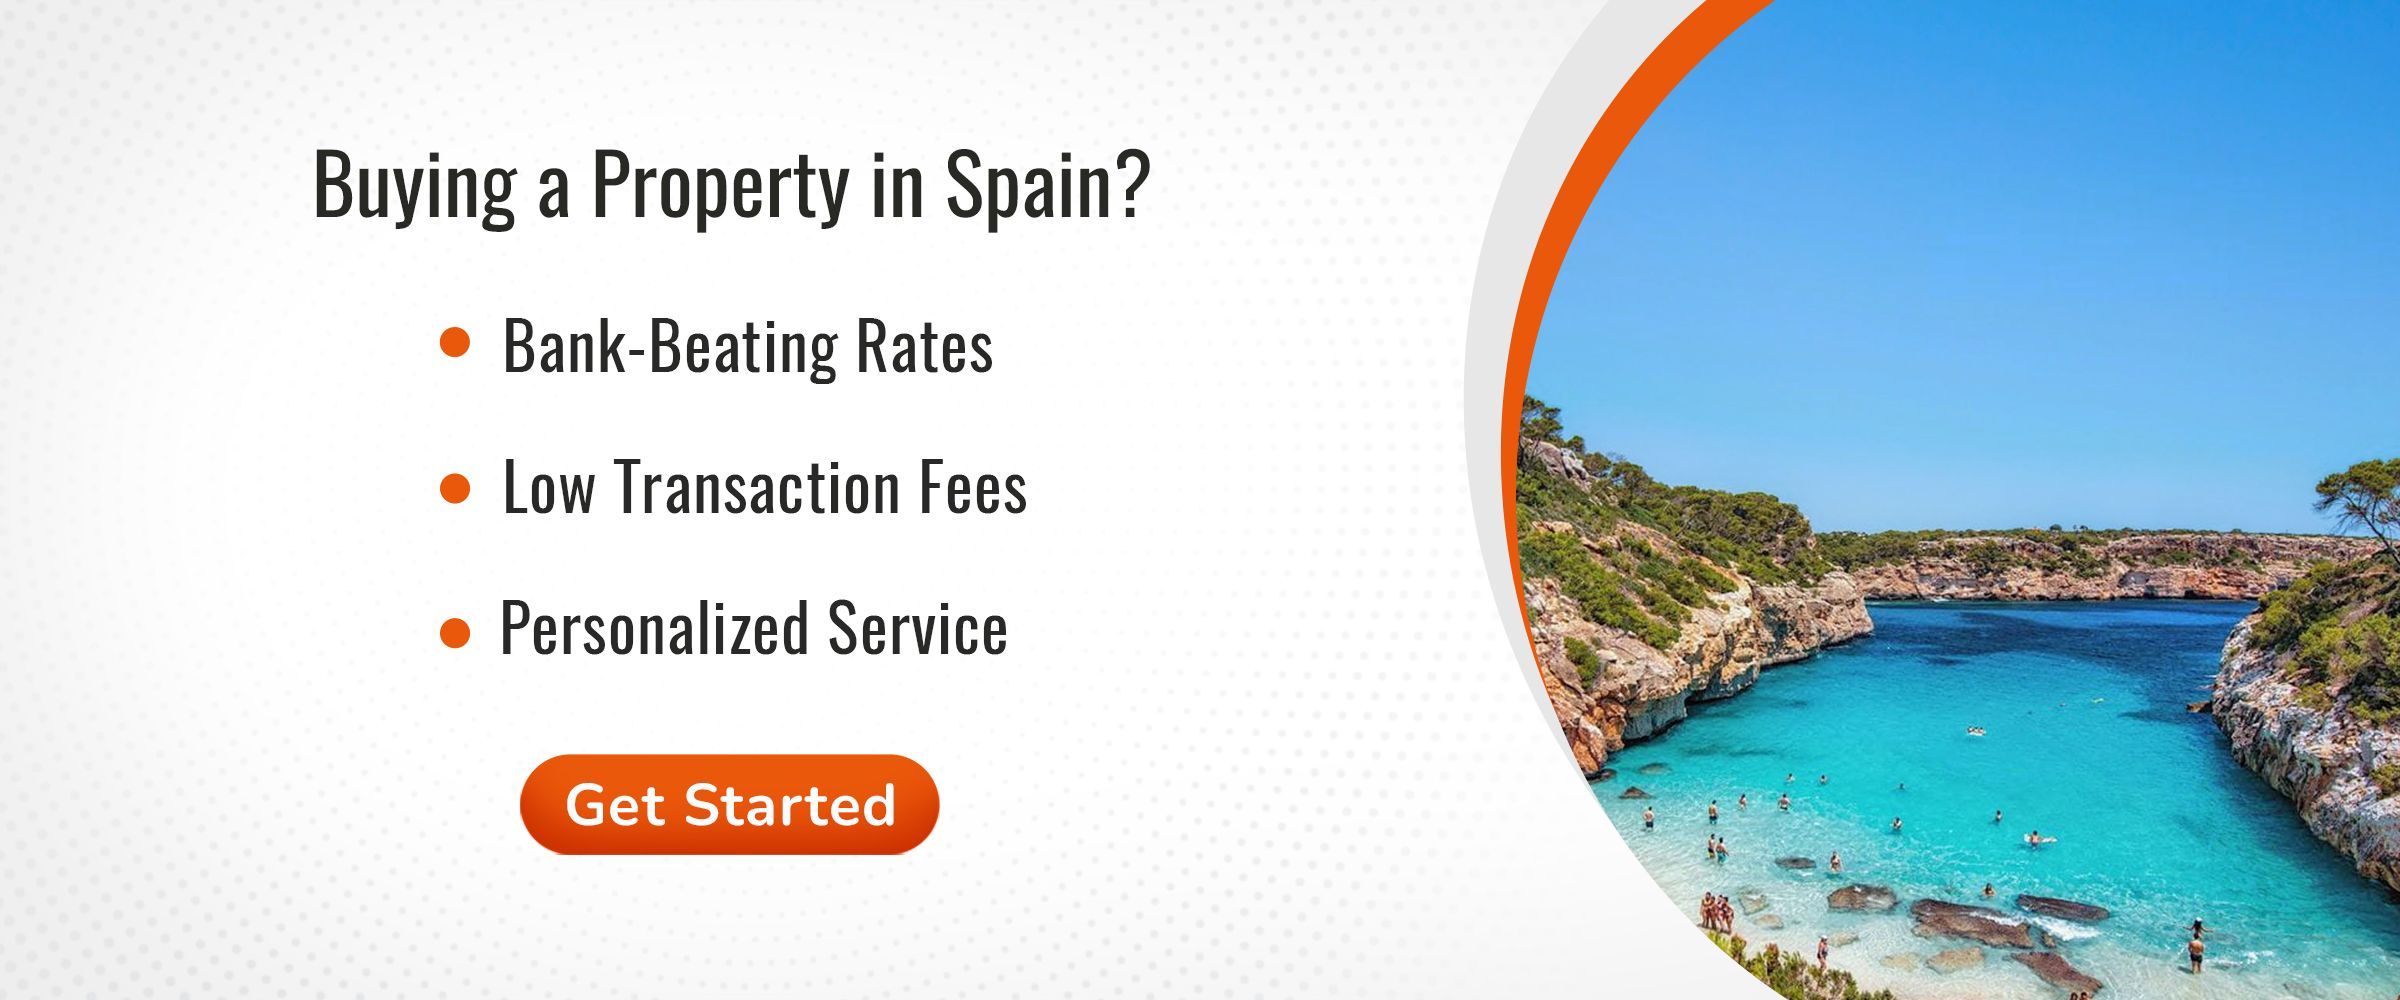 Buying Property in Spain: A Guide for Canadians